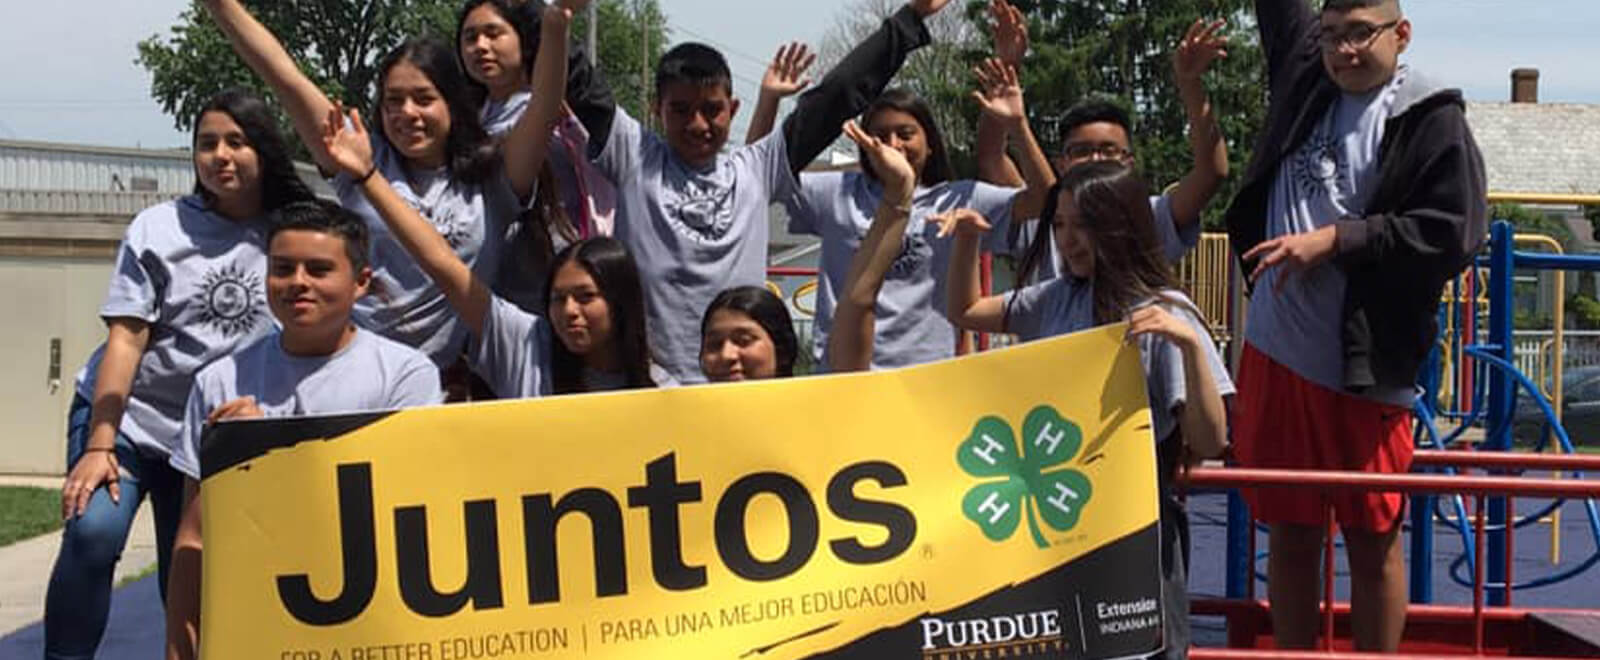 Juntos student group holding a banner